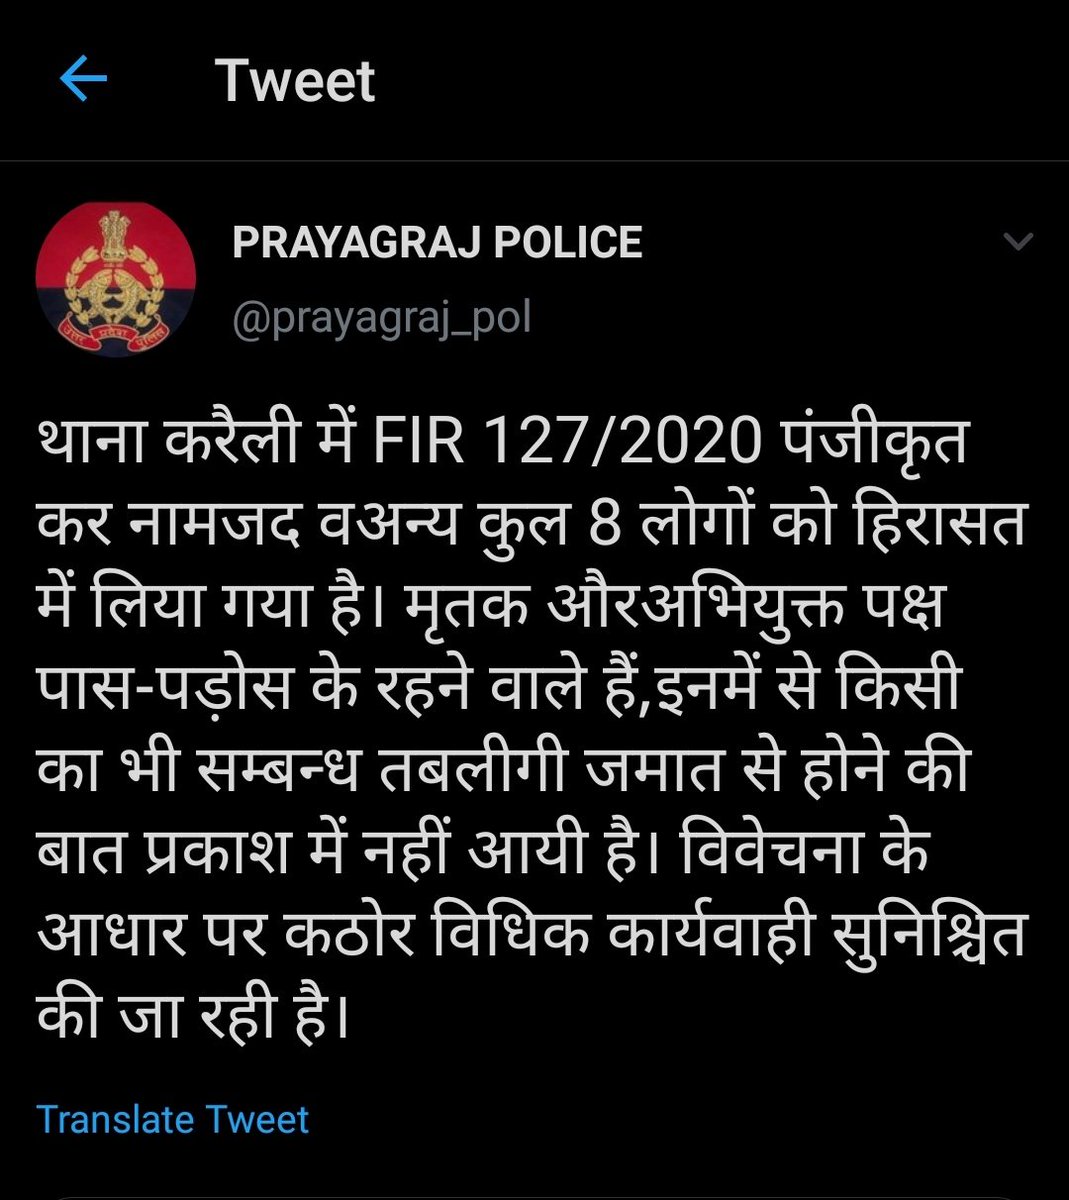 killed the other person. But now this has been cleared by Prayagraj Police official Twitter account  @prayagraj_pol that there was no Jamaat angle.You can see by now that How they make a local dispute issue into a communal issue.On their news channels they invite muslims.. (3/n)